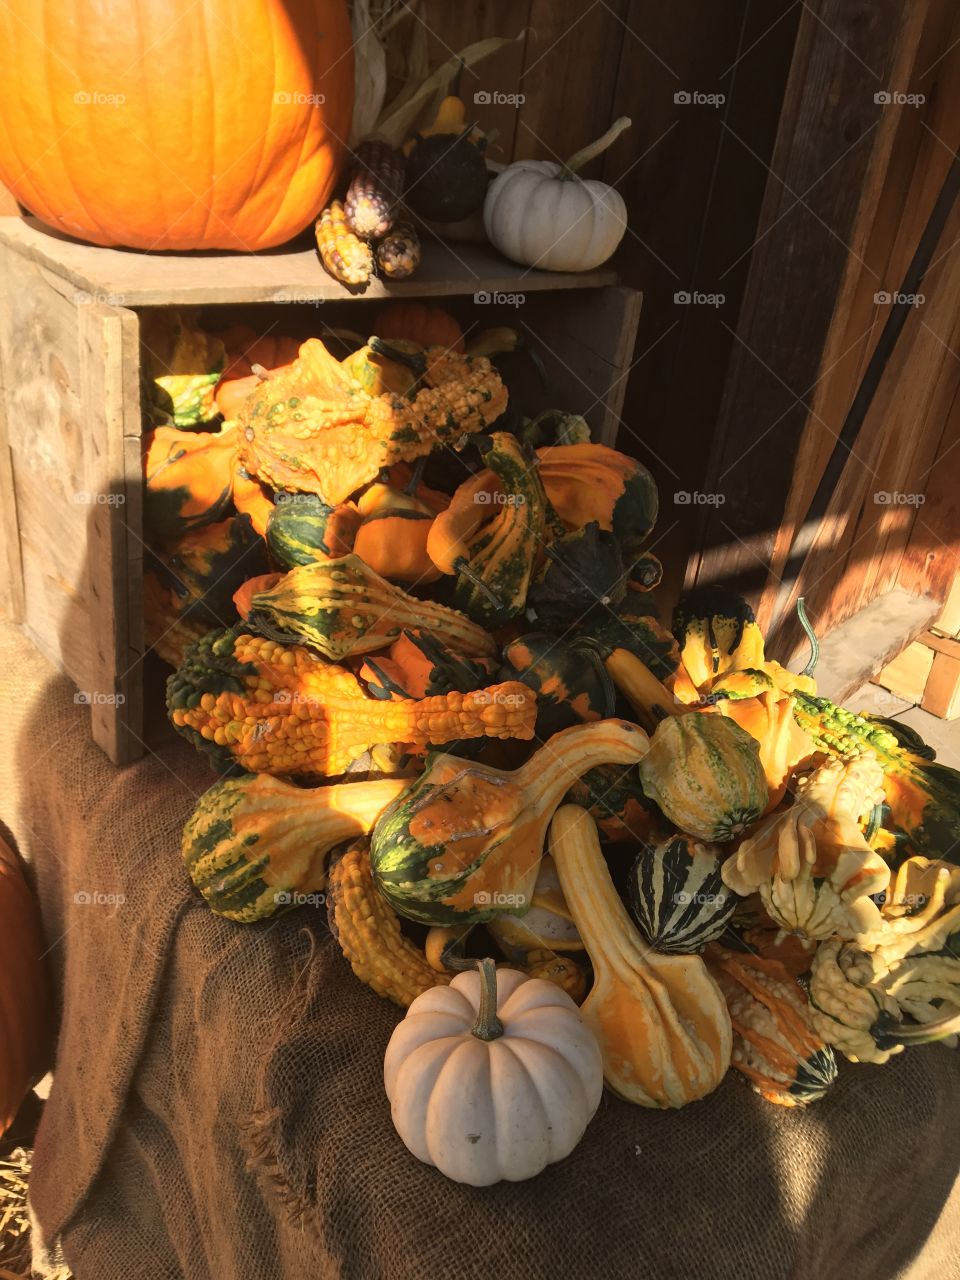 Fun, colorful assortment of fall gourds. Perfect snapshot of a fall outing in New England.